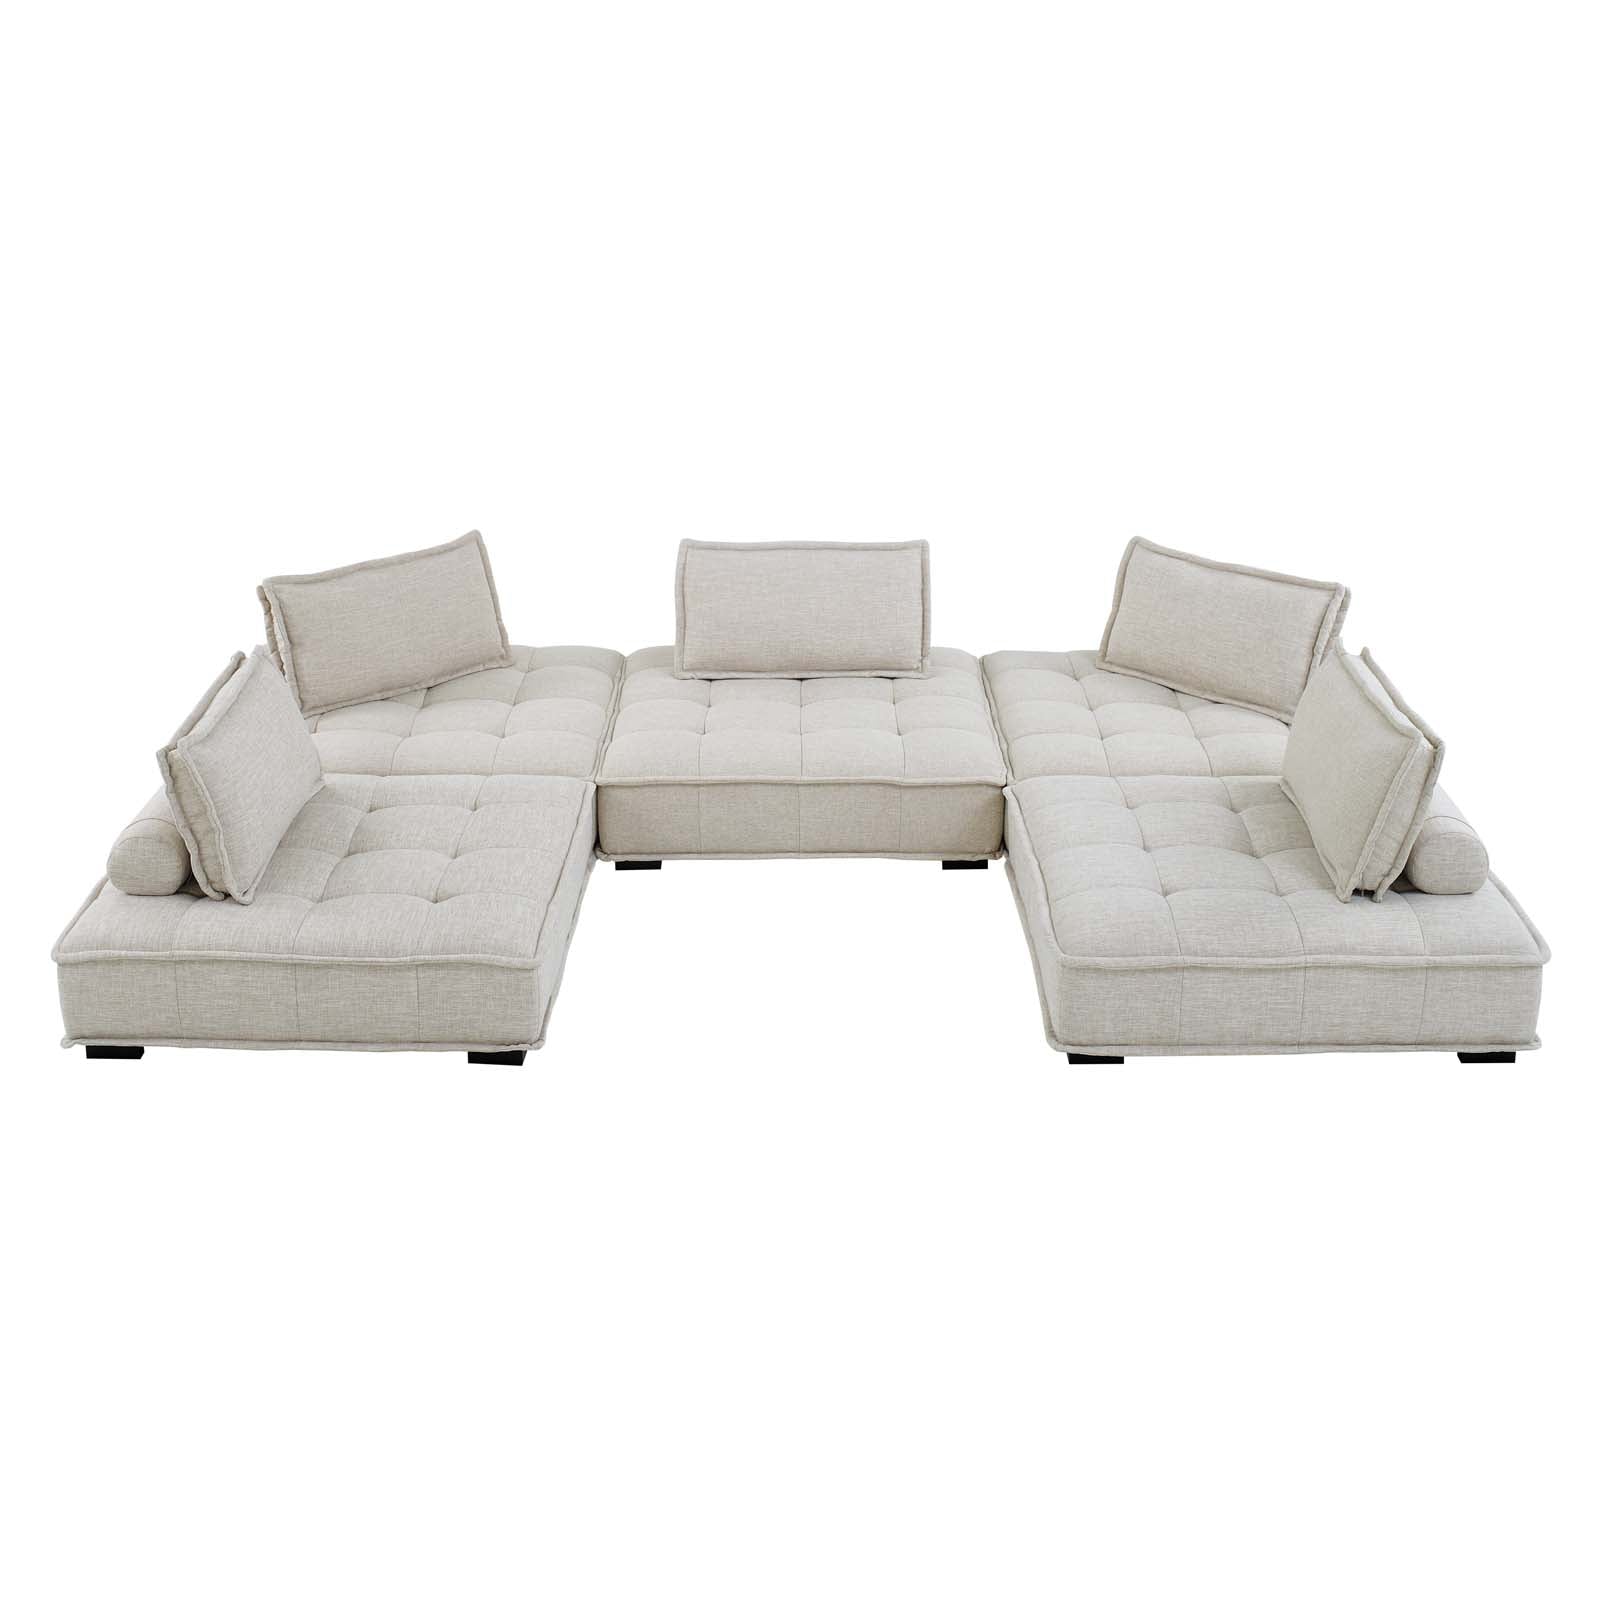 Modway Sectional Sofas - Saunter-Tufted-Fabric-Fabric-5-Piece-Sectional-Sofa-Beige